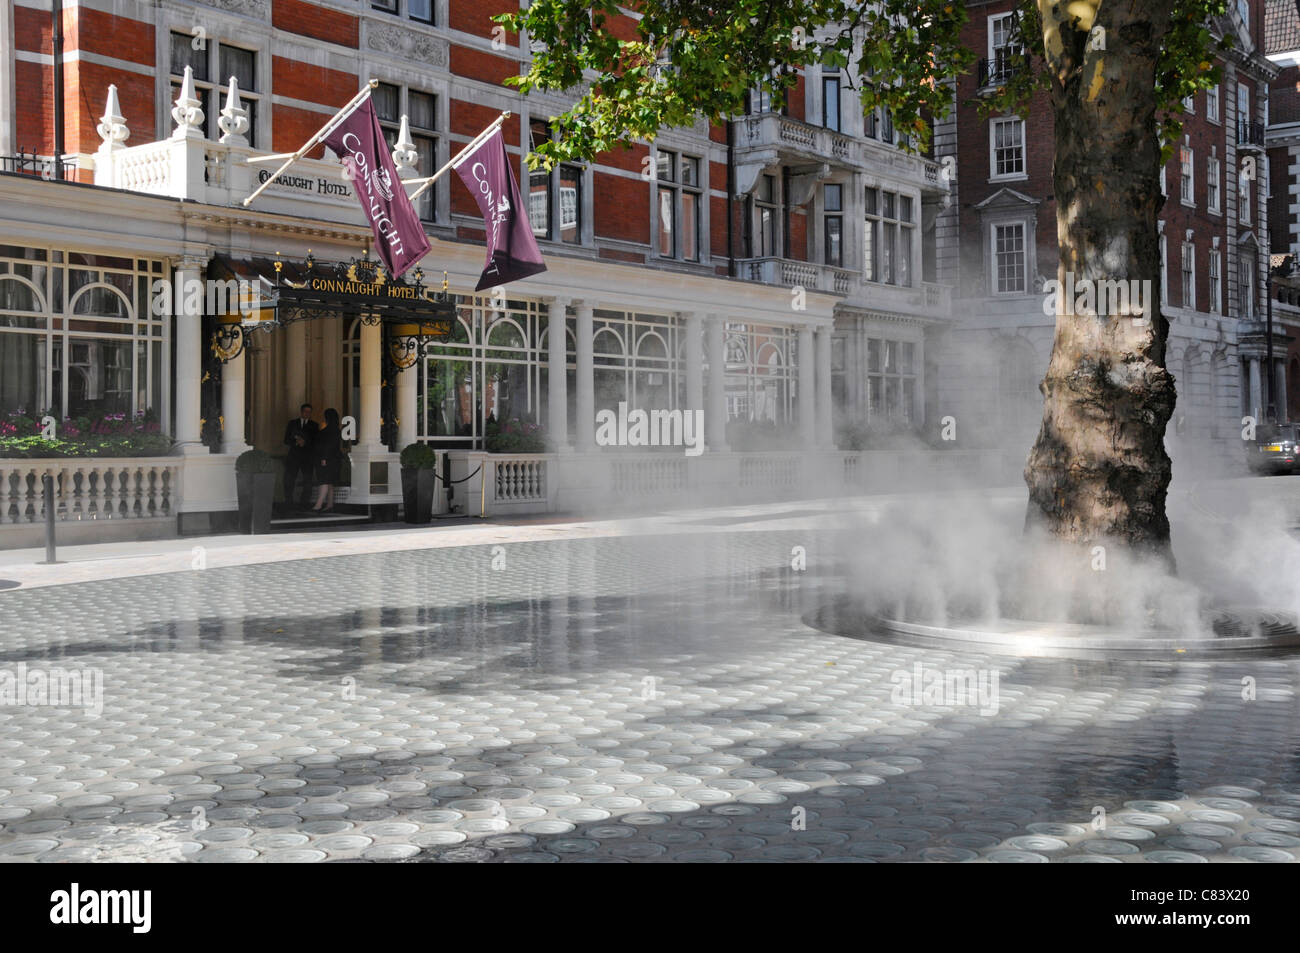 Street scene steam mist vapour cloud on 'Silence’ water feature rising from tree trunk  Carlos Place Mayfair Connaught Hotel beyond London West End UK Stock Photo